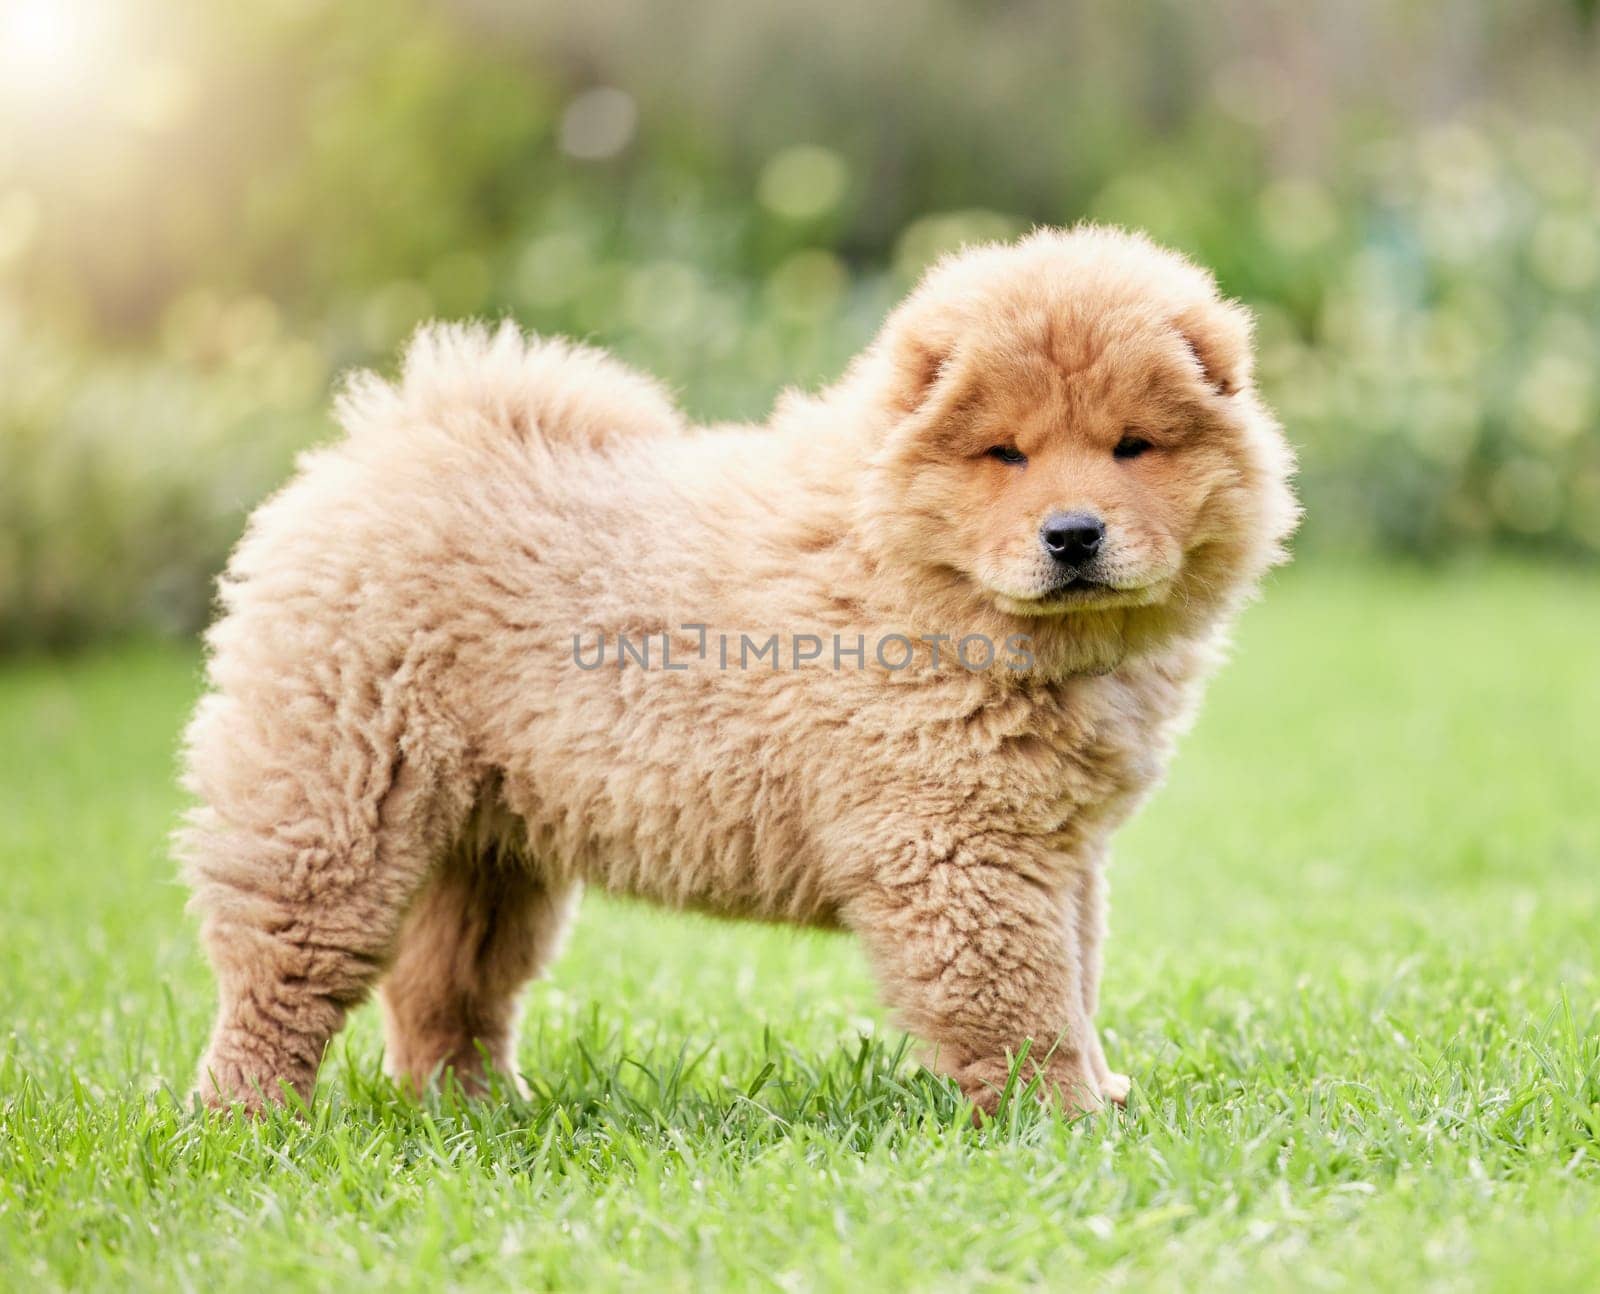 Cute, pets and grass with portrait of dog on backyard lawn for animals, fluffy and mammal. Summer, environment and nature with chow chow puppy on outdoor field for playful, relax and purebred.